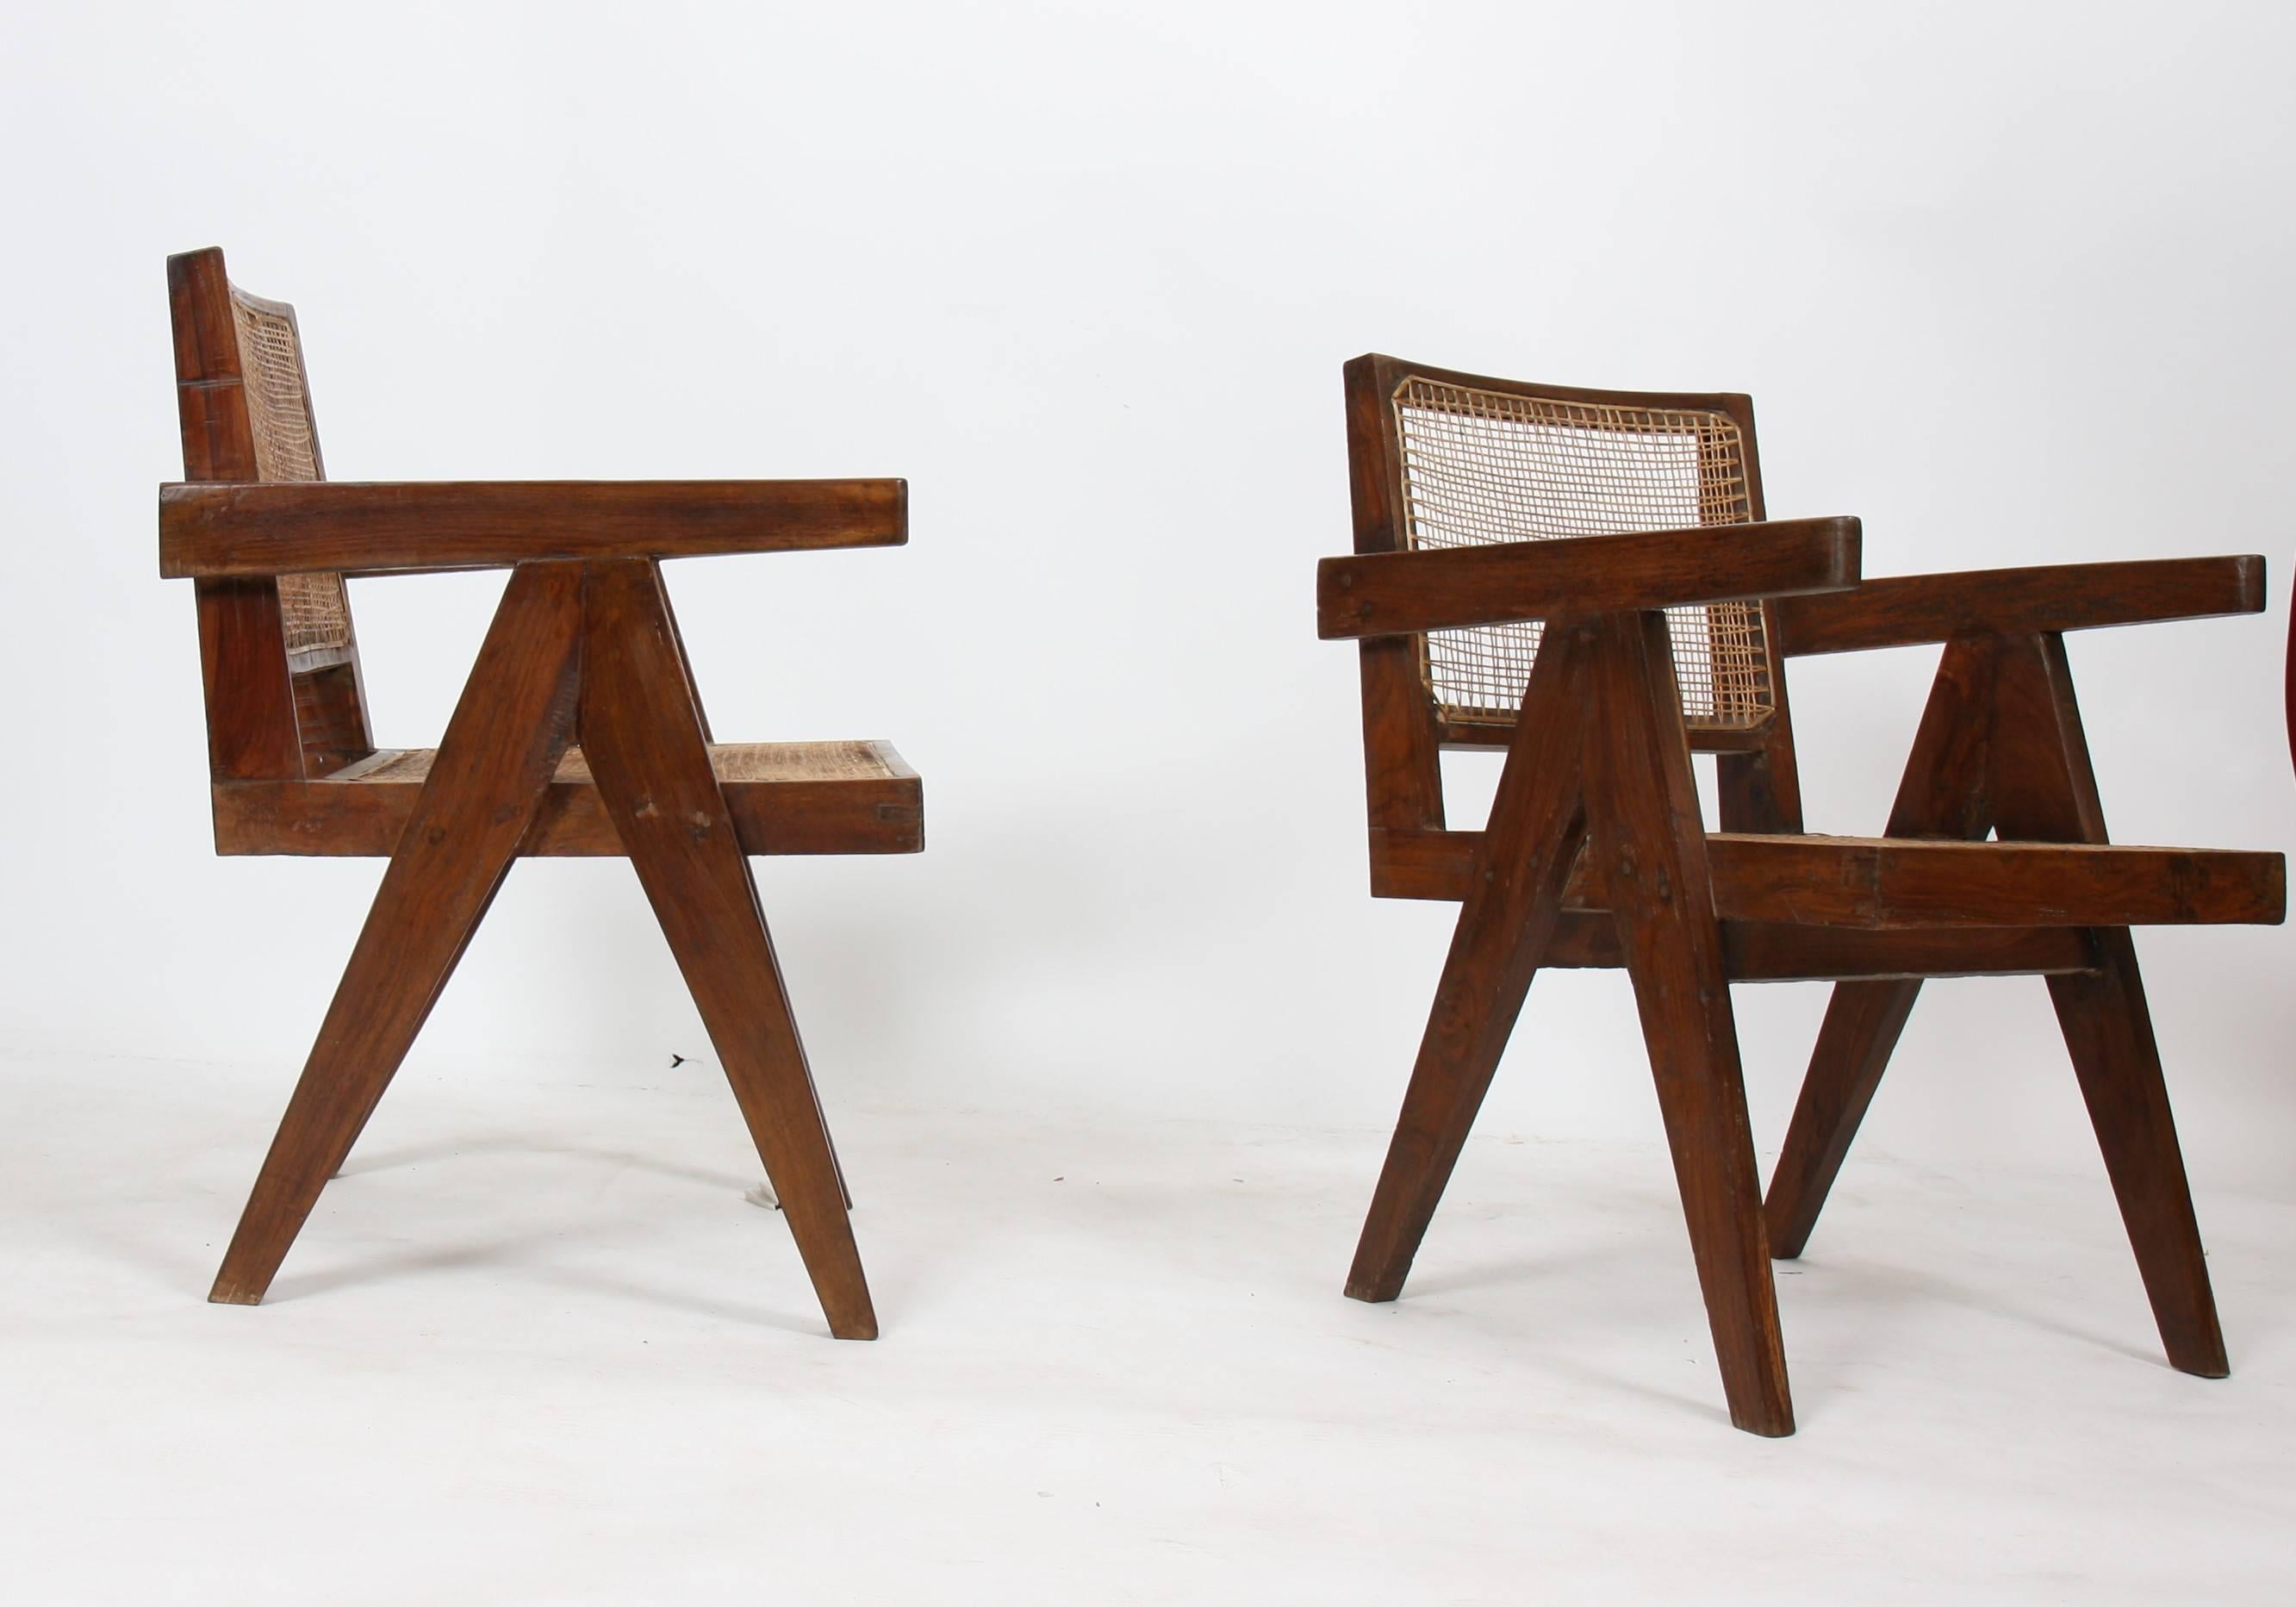 
Pierre Jeanneret (1896-1967).
Set of two armchairs called "office cane chairs."
In teak, with bended and slightly curved back.
Detached armrests profiled on side compass feet.
The back is fixed to the seat by two small